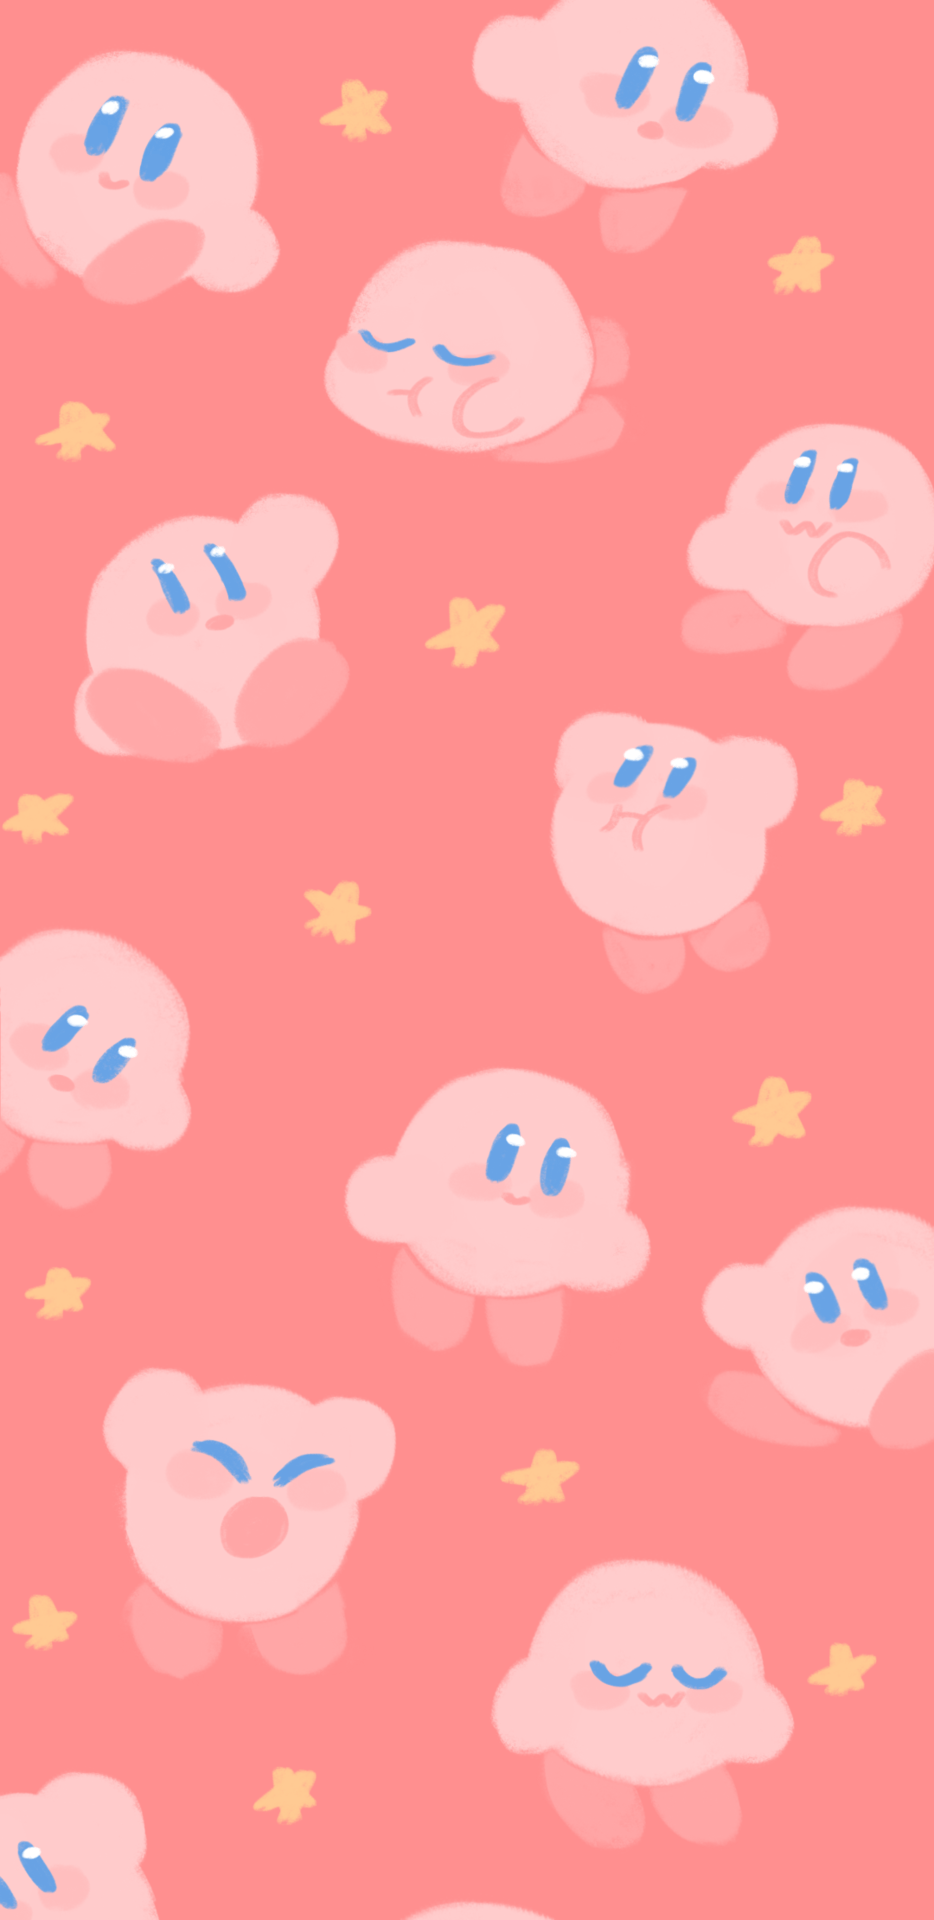 Cute Aesthetic Kirby Wallpapers